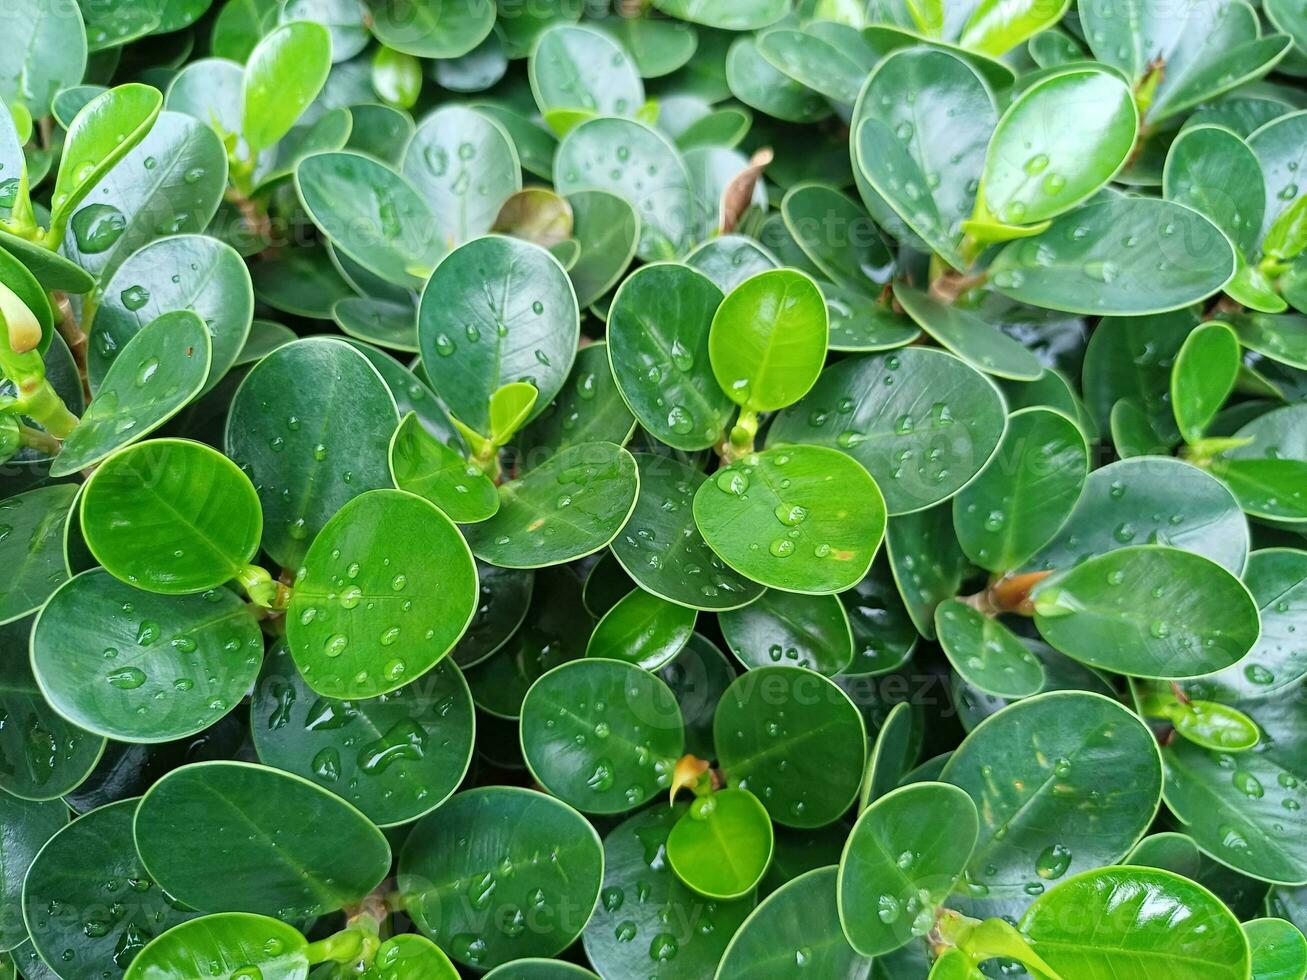 Group of Ficus annulata with drop rain,round shape green leaves nature background. photo